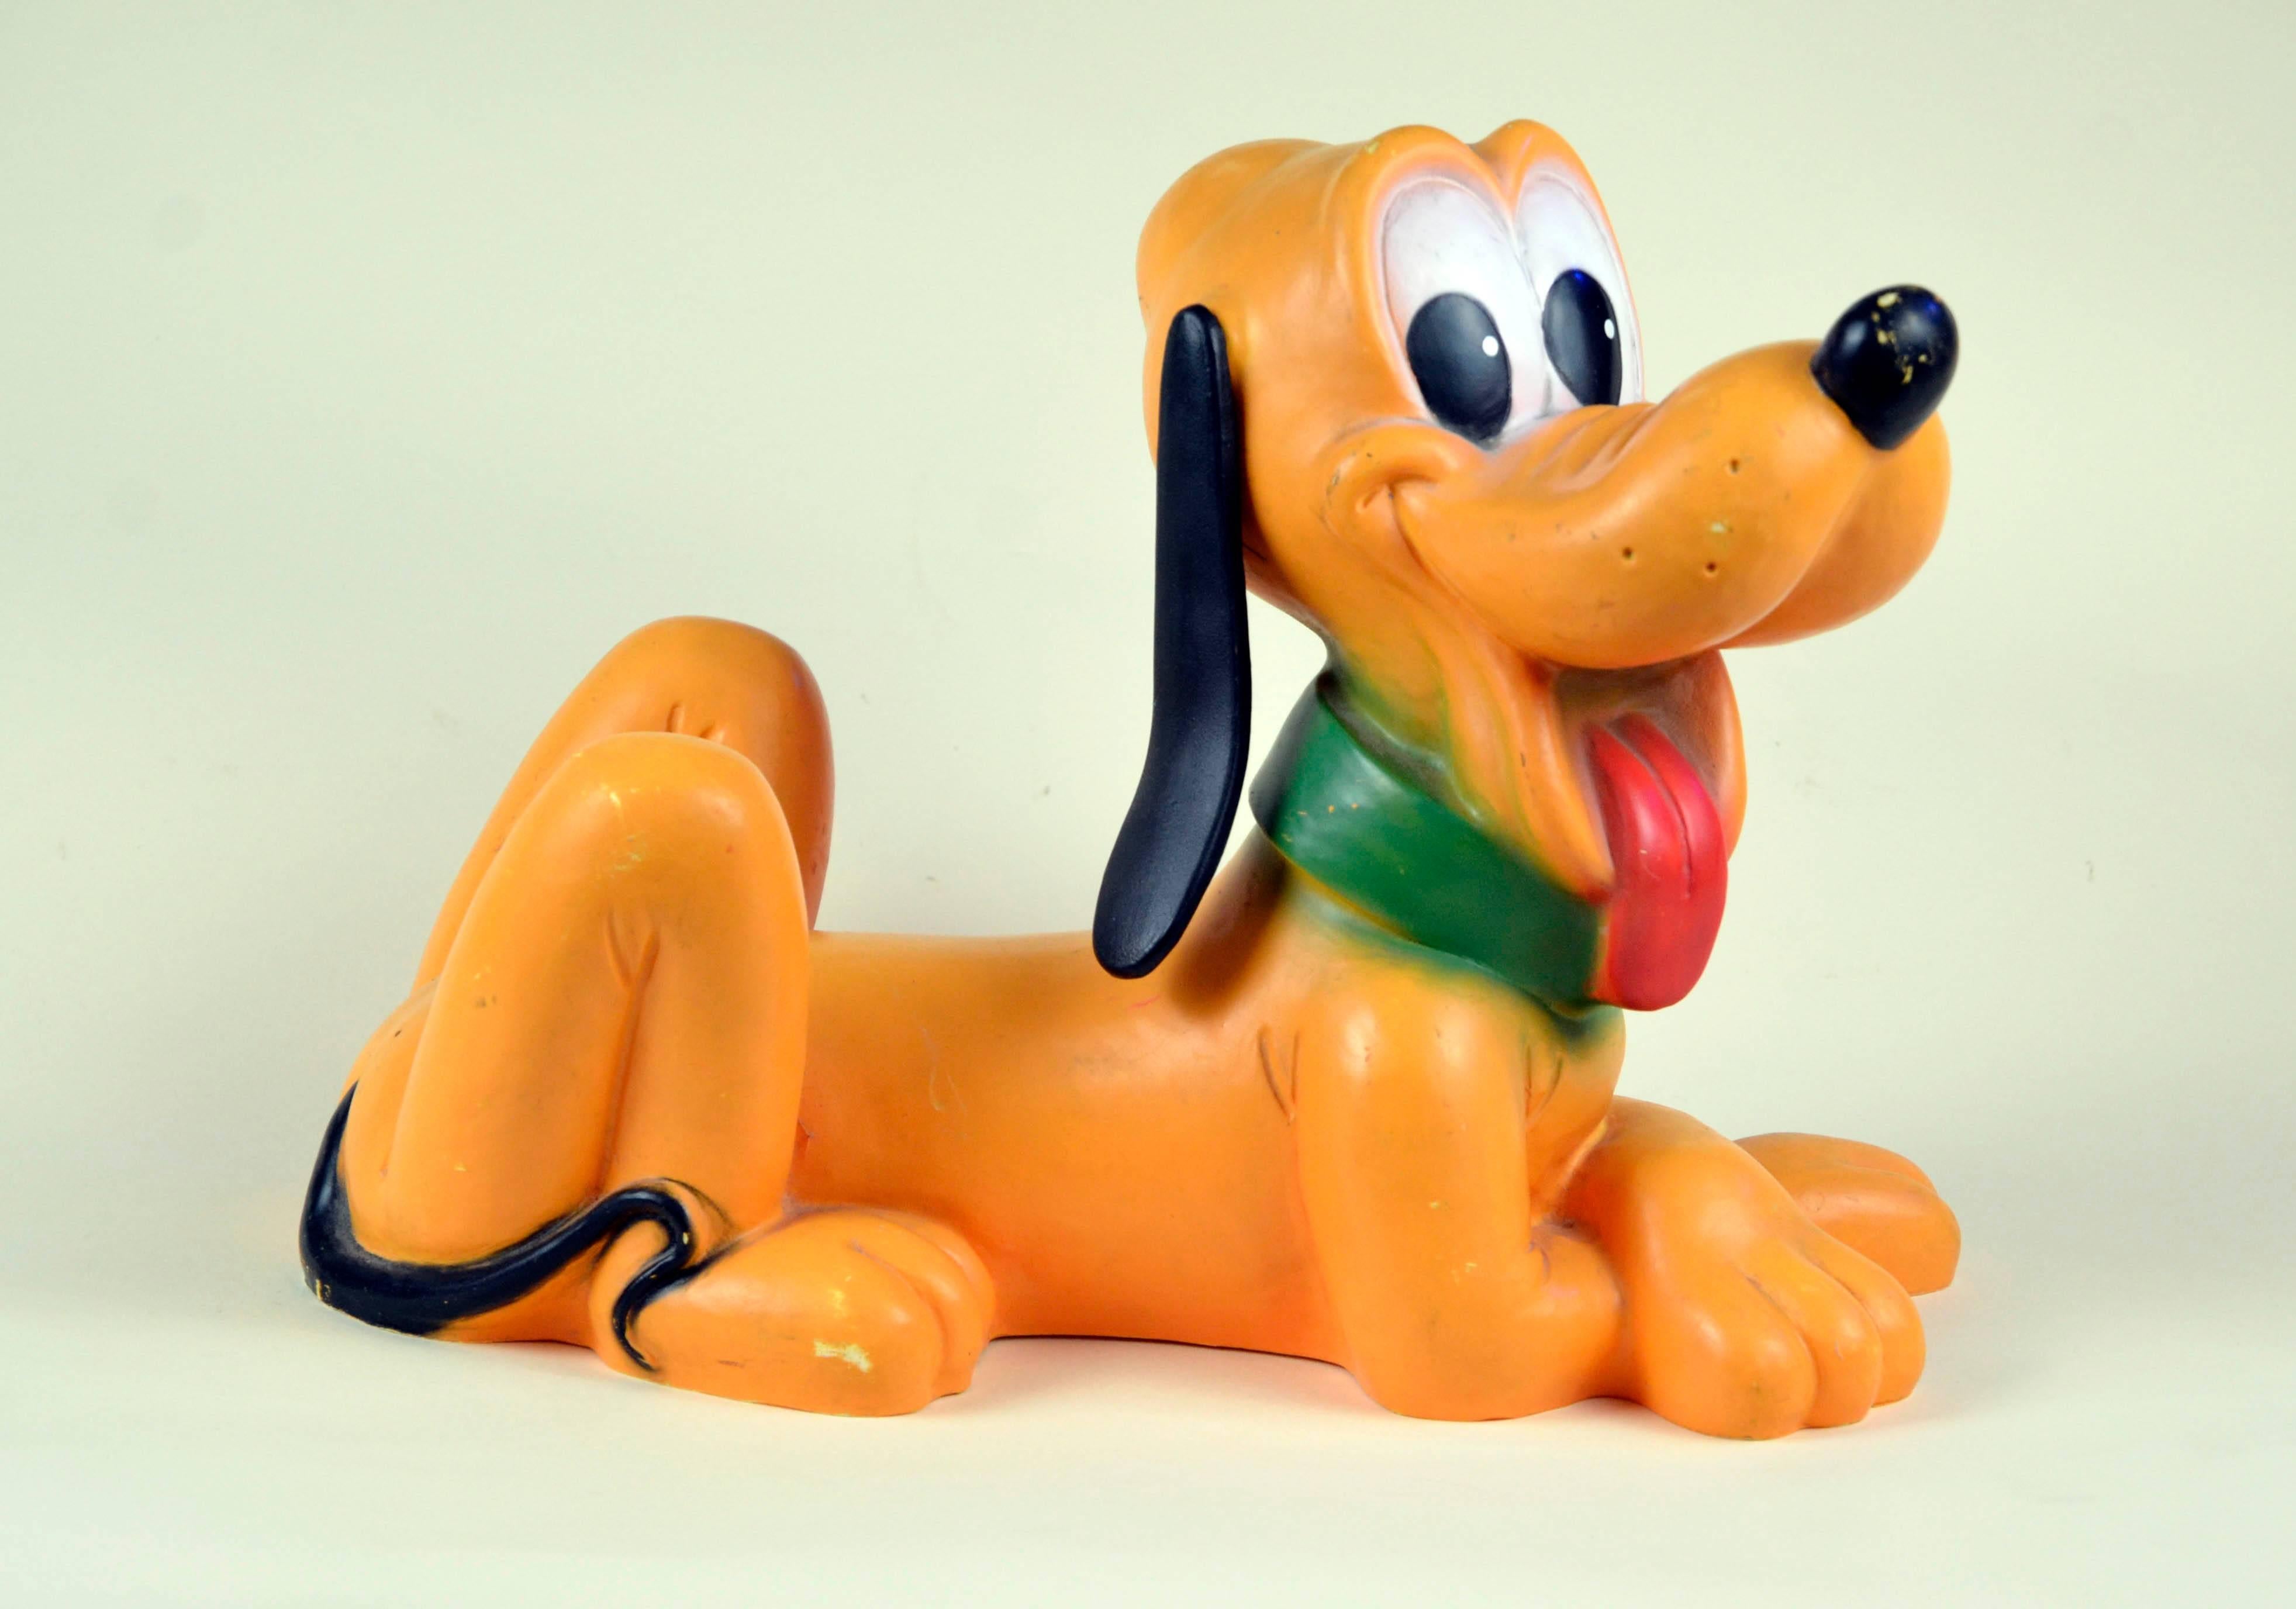 Nice vintage Pluto the Pup nightlight from the German brand Heico, made in the 1980s under licence for Disney. Pluto ears can be twisted.
Originally produced as nightlight is made of plastic, but don't have at present any electrical